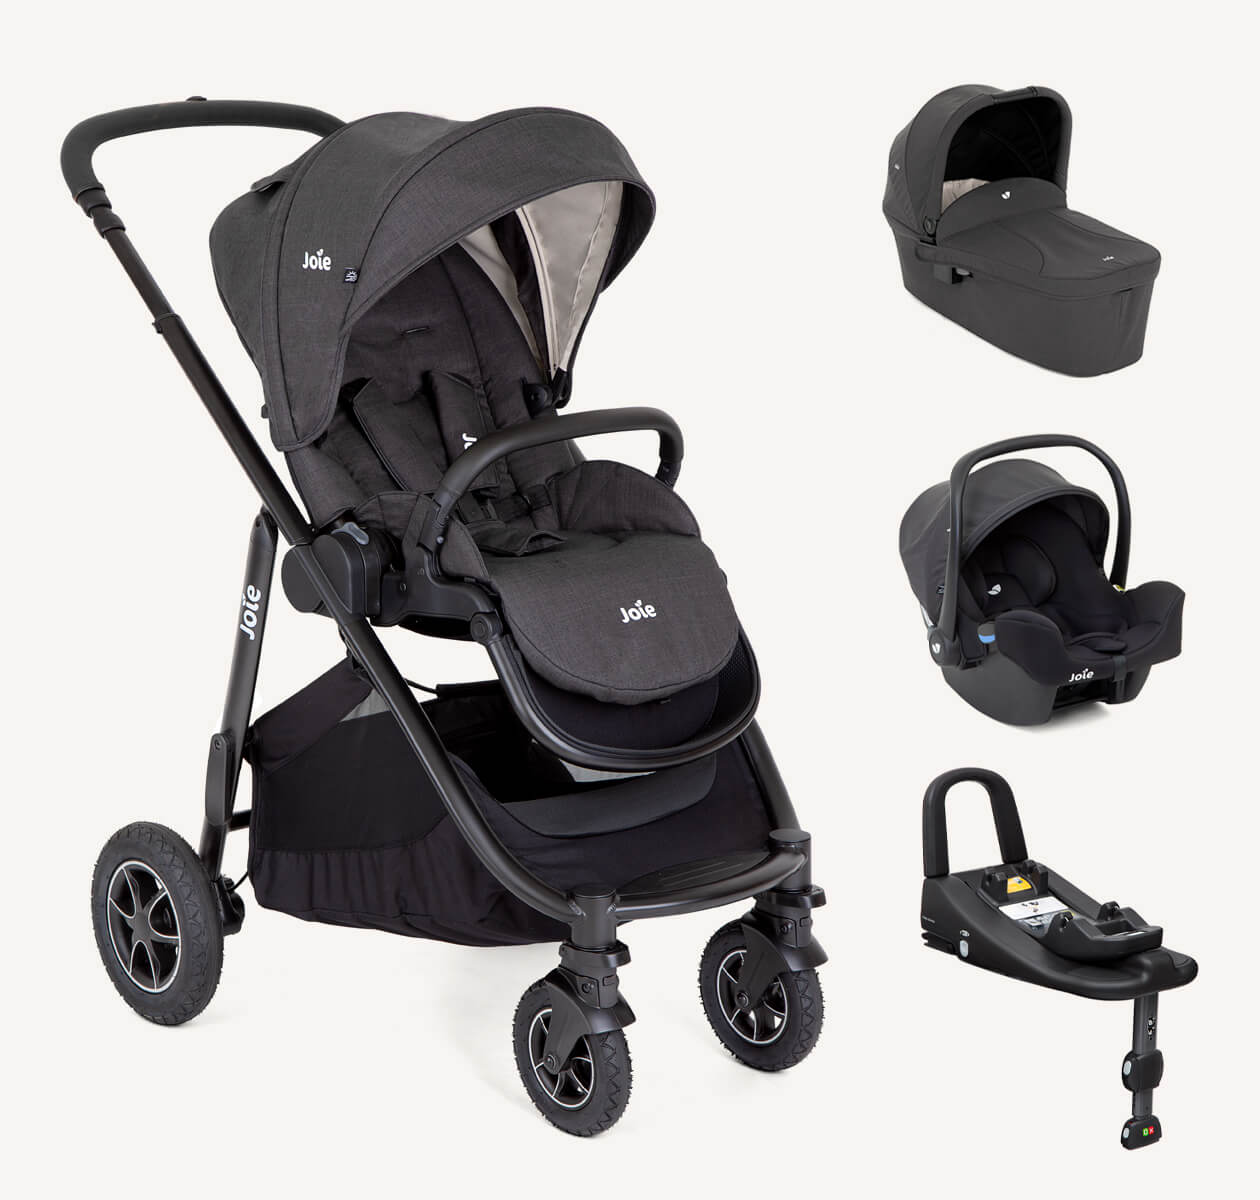 Joie Versatrax On The Go 4in1 Travel System Bundle with Isofix Car Seat ...